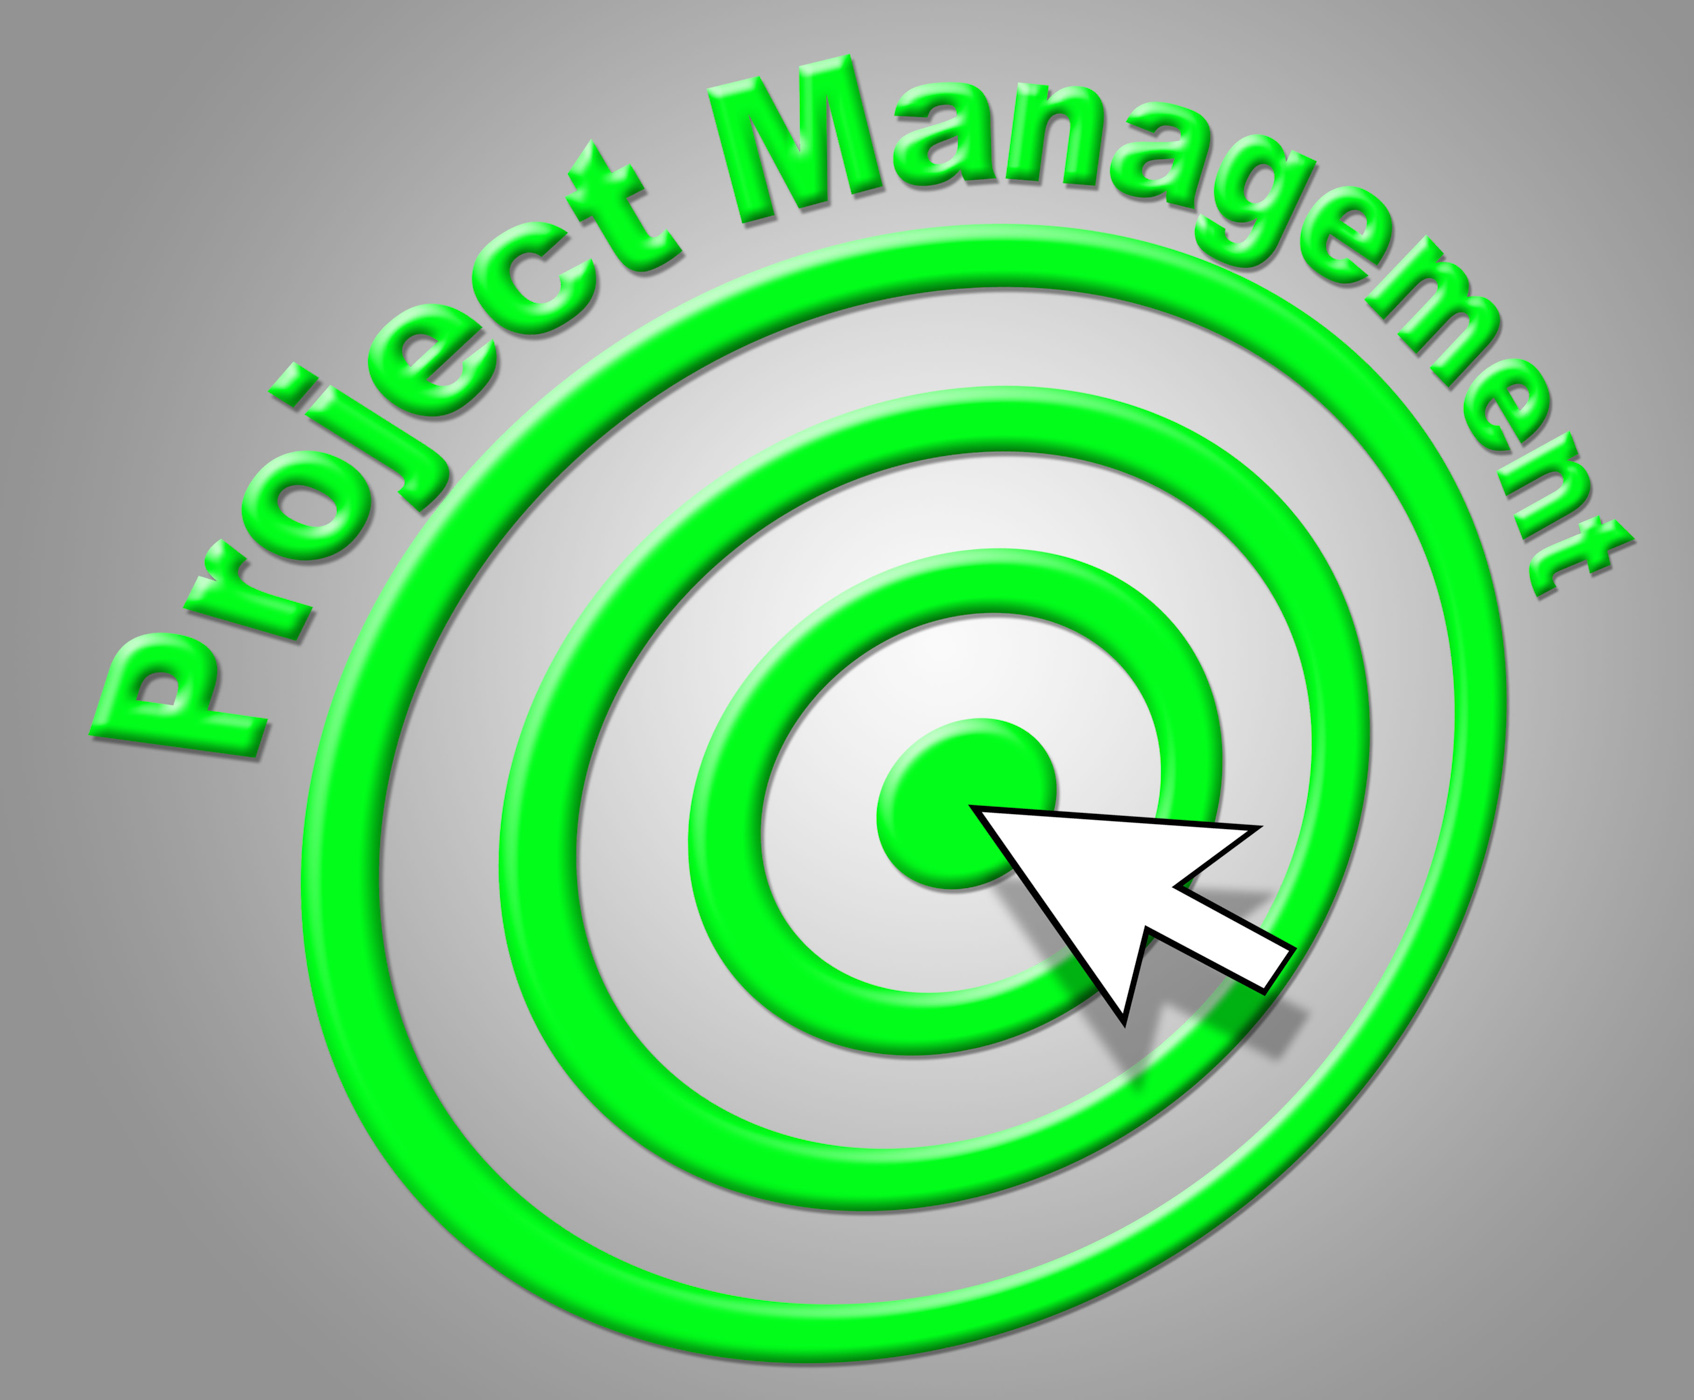 Project Management Shows Enterprise Projects And Administration, Activity, Manager, Tasks, Task, HQ Photo